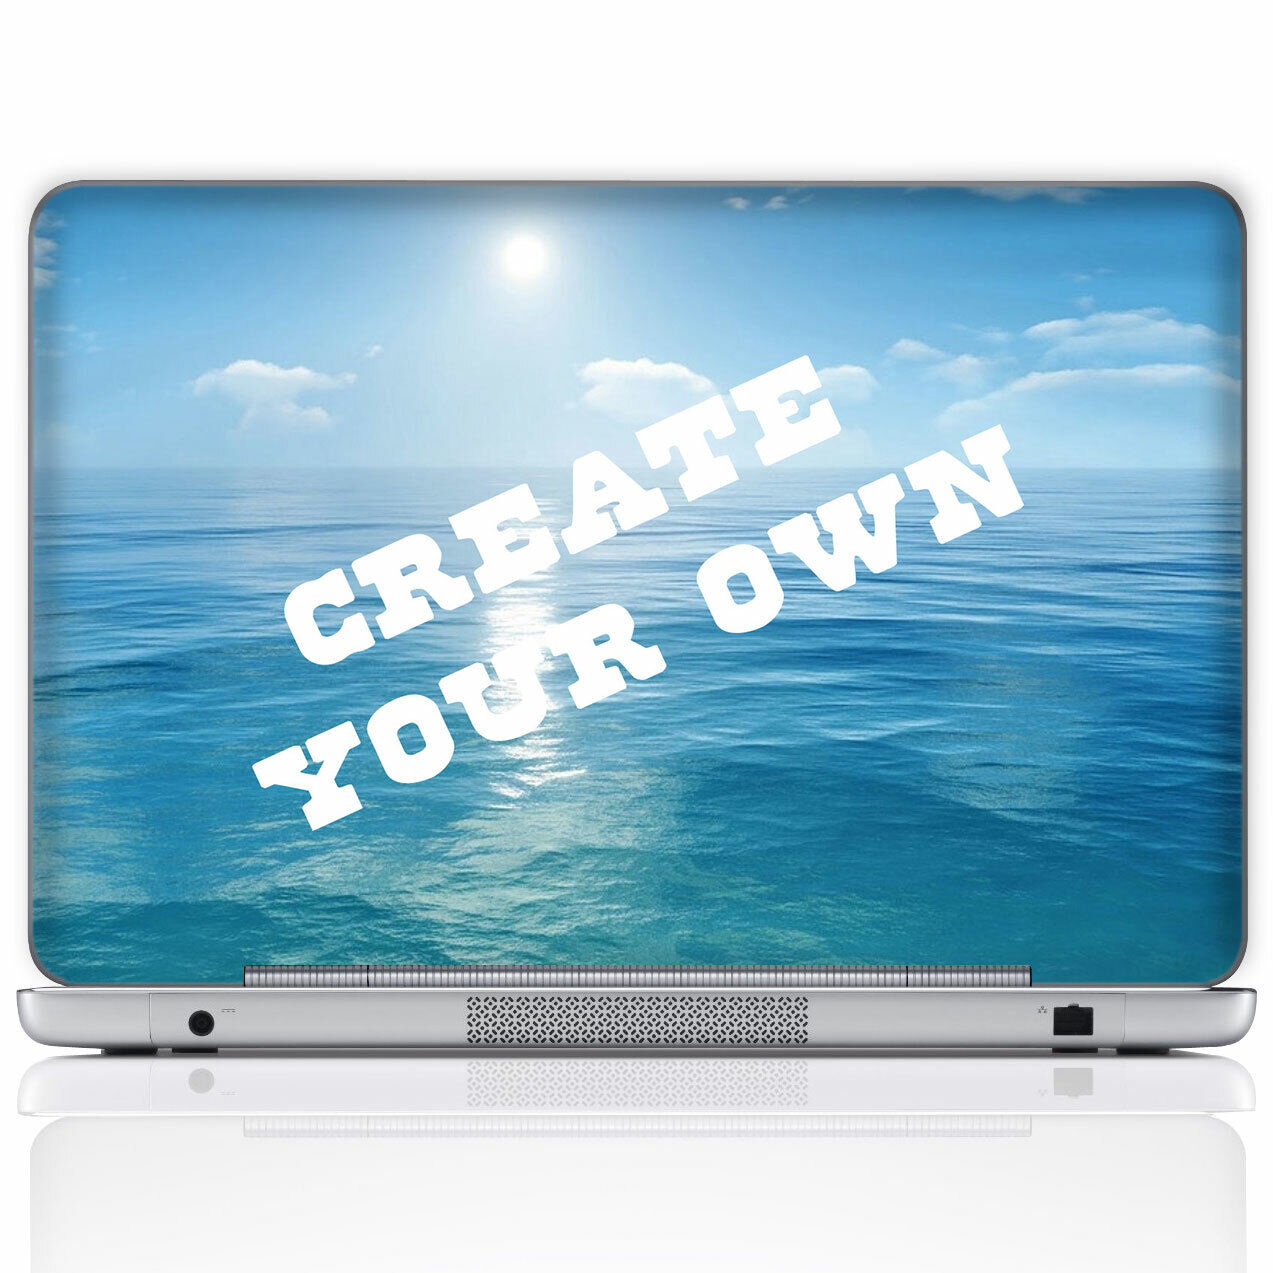 Personalized Laptop Skin Sticker, Customized Your Own Image (w. 2 Wrist Pads)